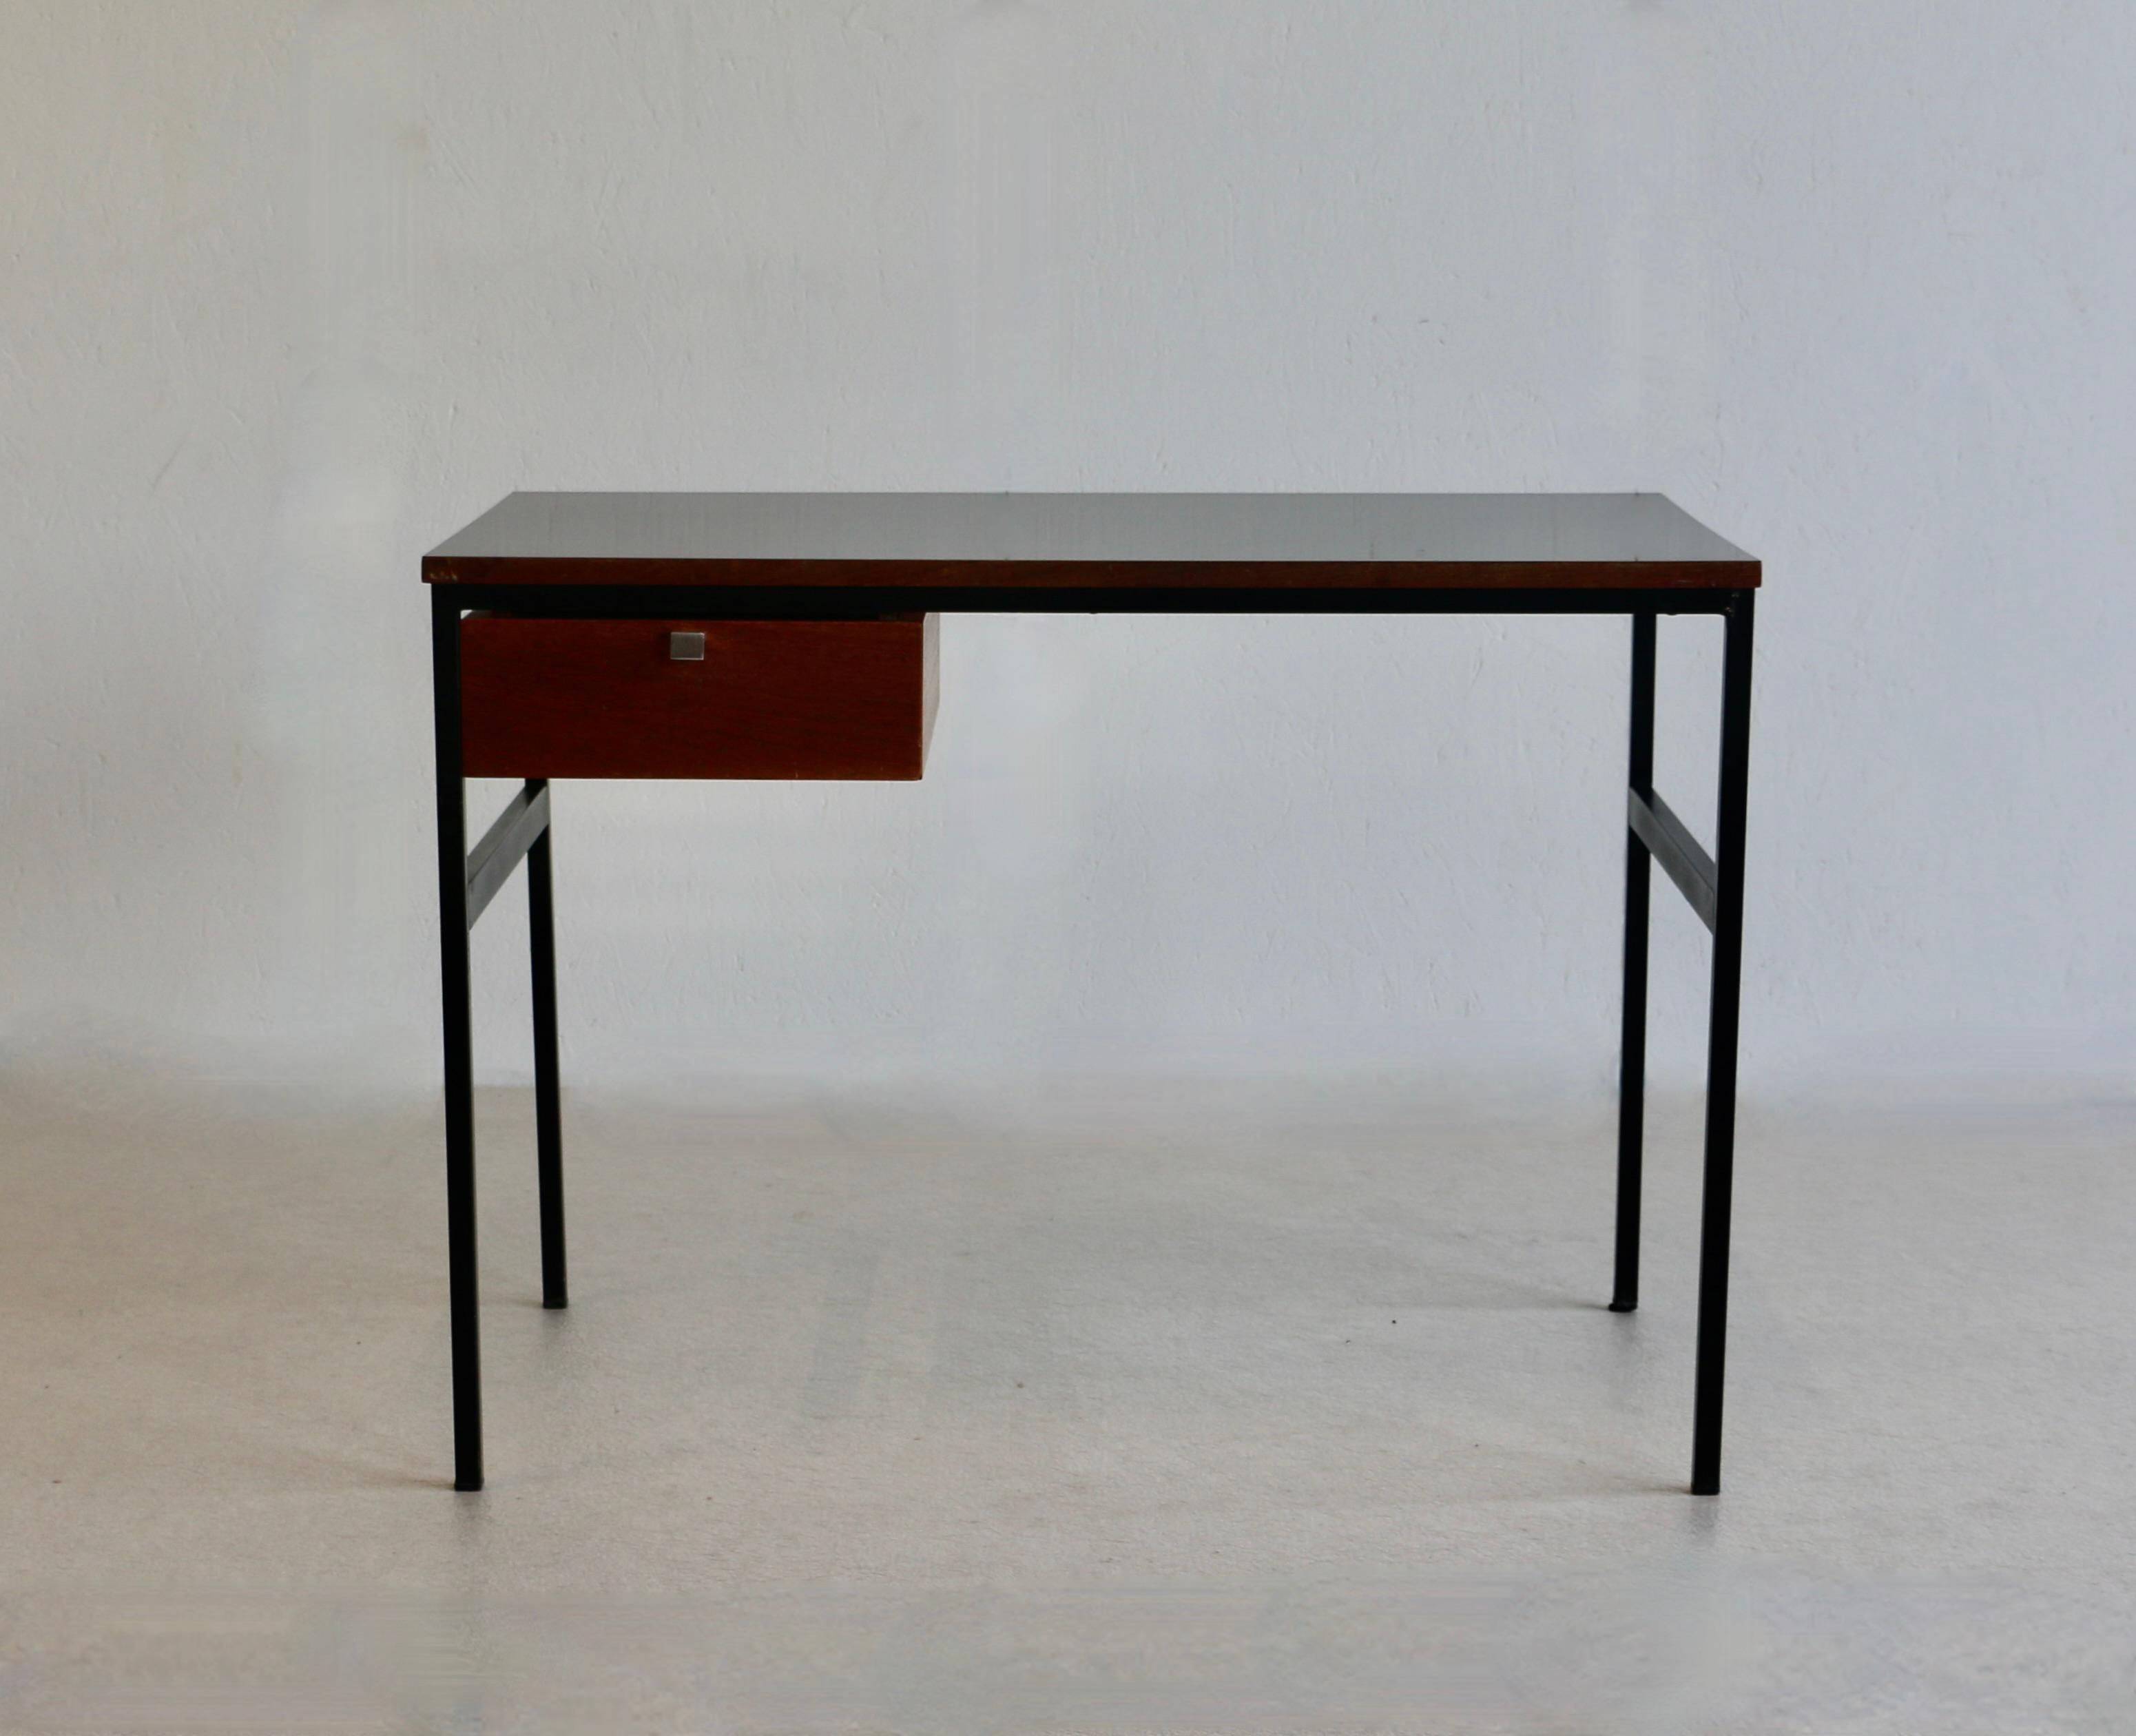 A very rare Pierre Paulin (1922-2009) model CM 217 desk with square tubular legs in black lacquered metal on which rests a plywood top covered with black laminate, suspended pedestal opening with a teak drawer France Edition Thonet 1962 The desk is